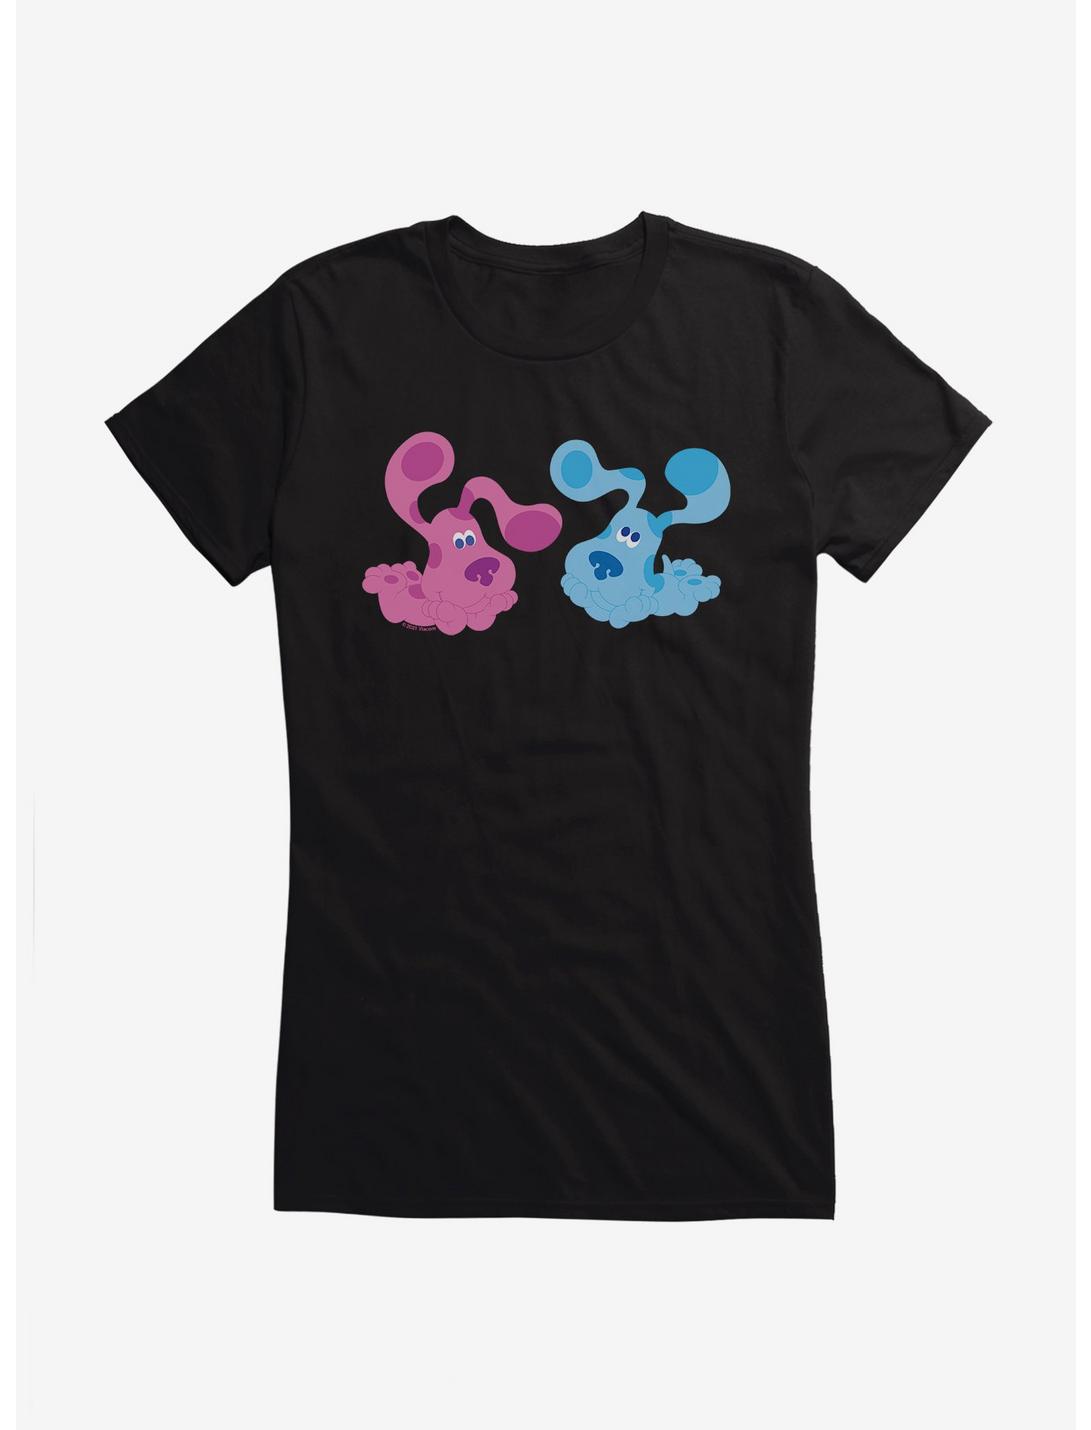 Blue's Clues Playful Magenta And Blue Girls T-Shirt, , hi-res